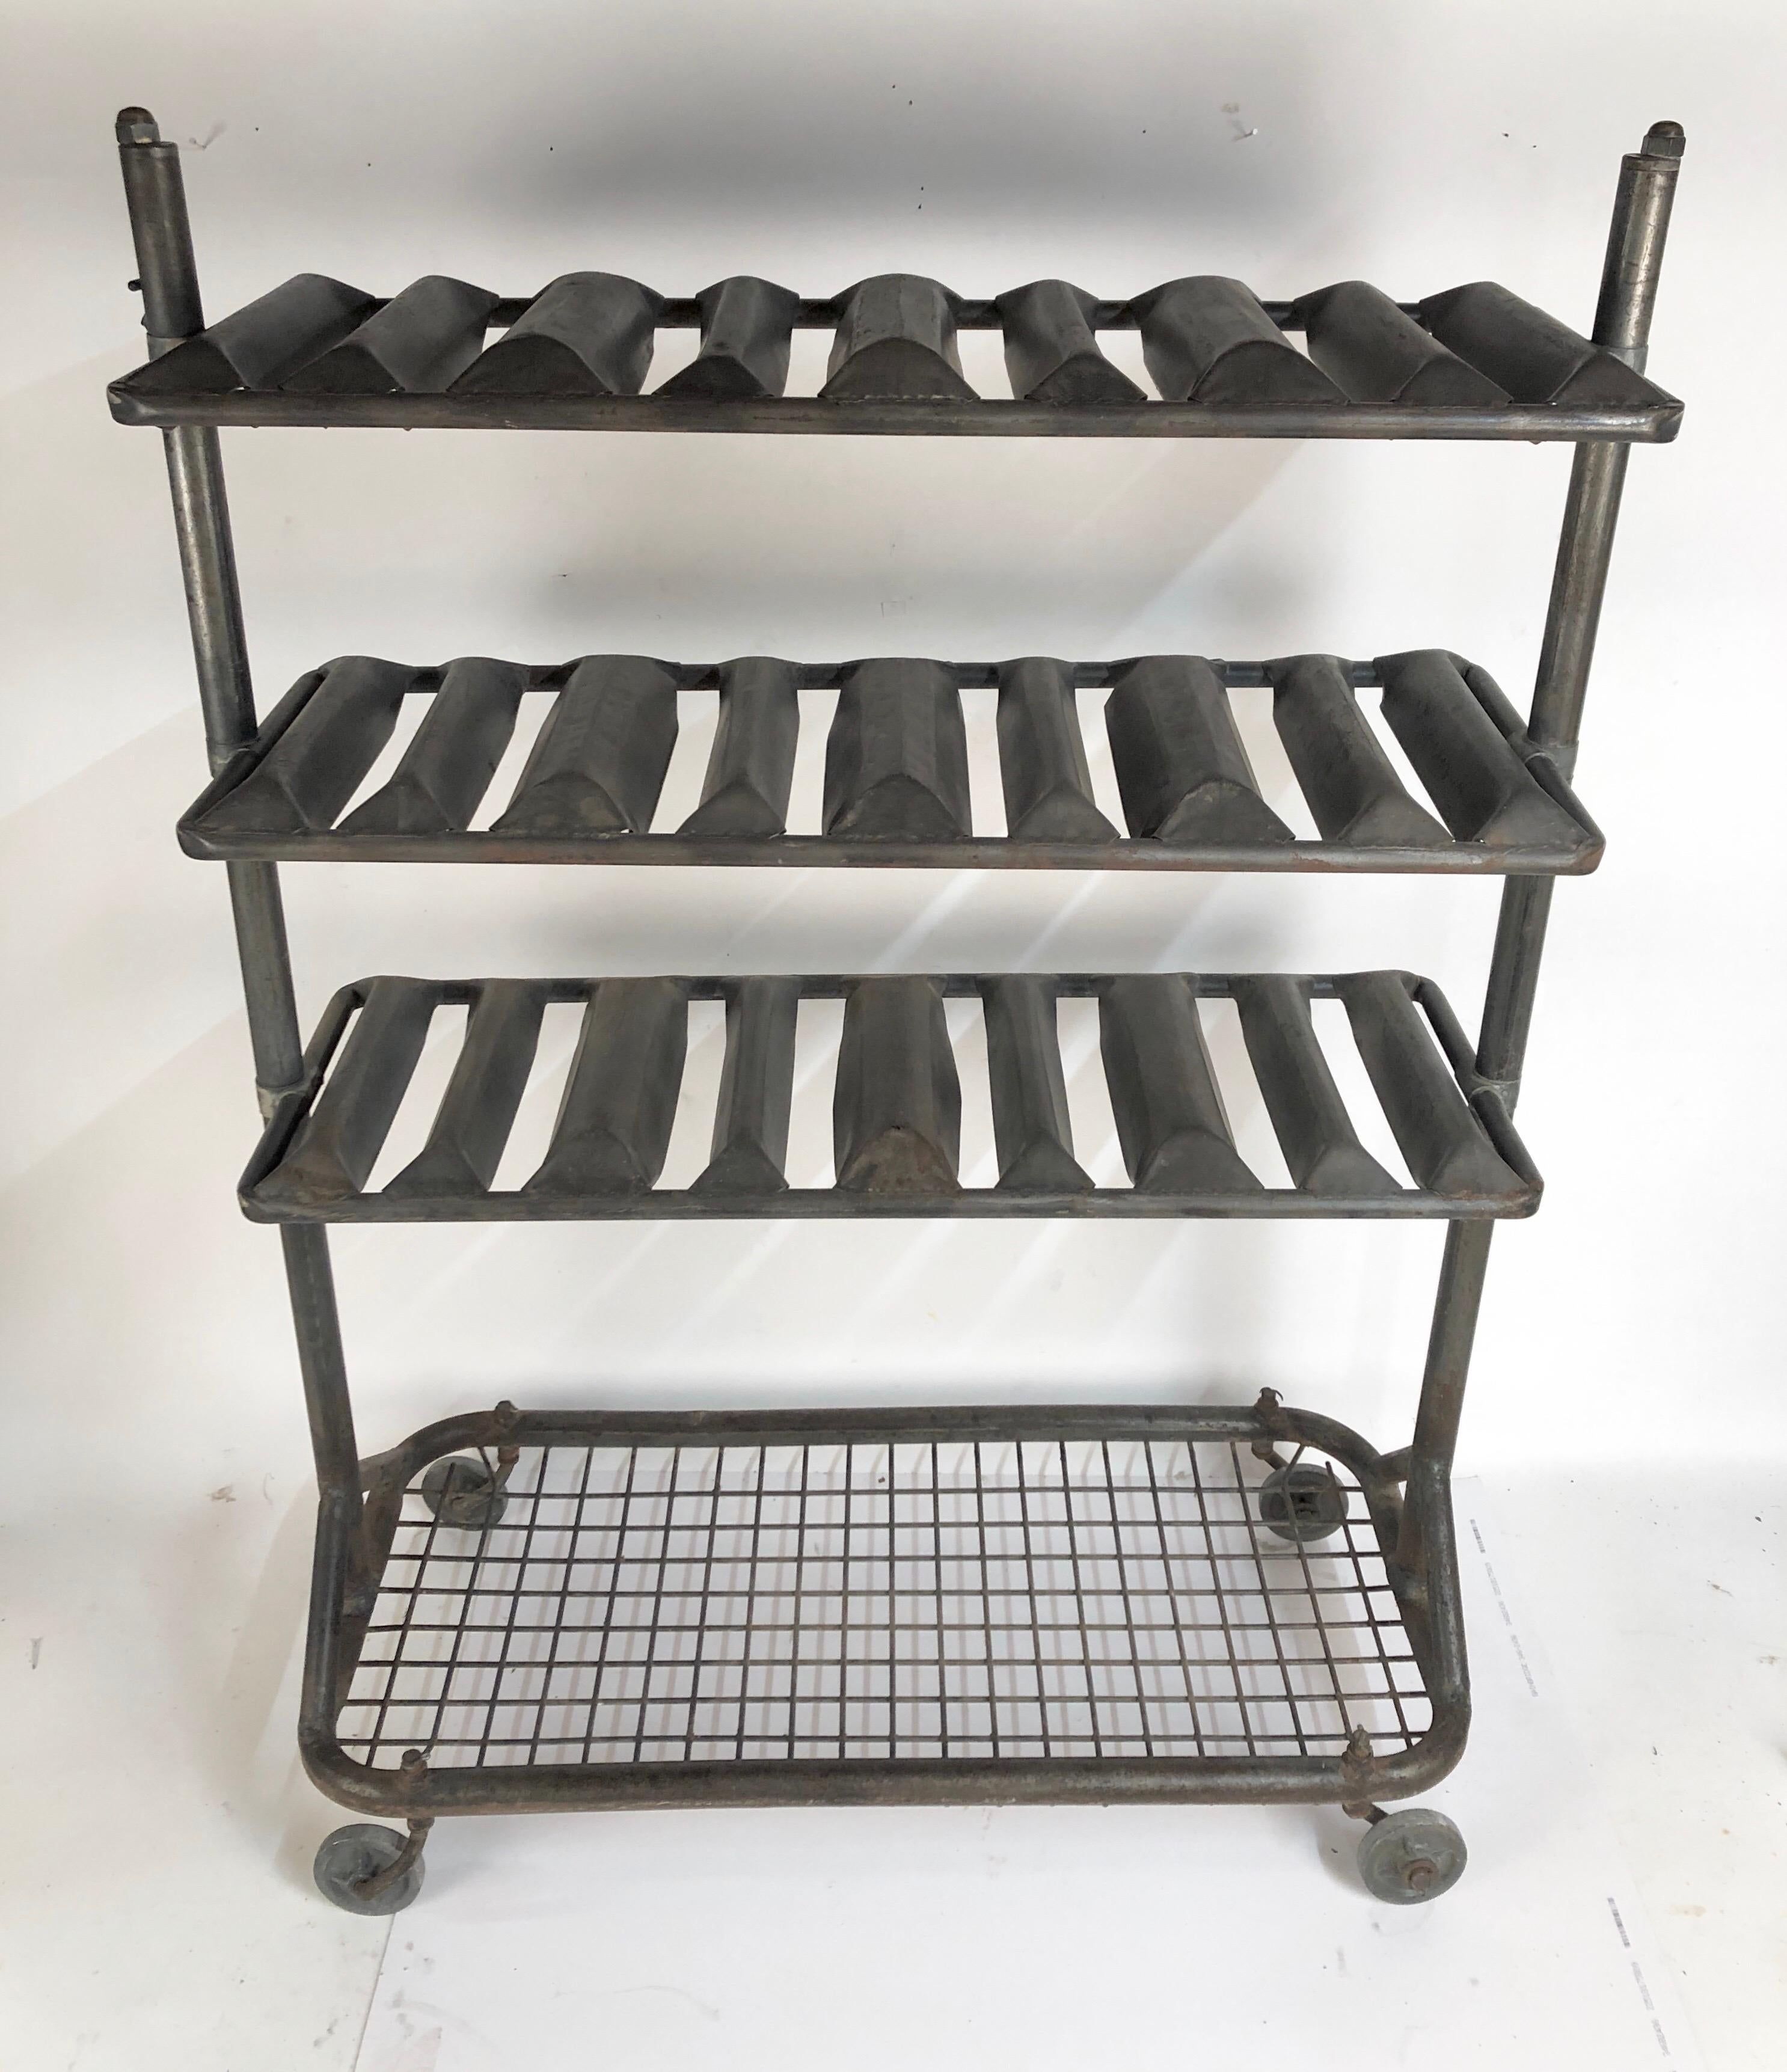 A circa 1930s French industrial steel drying rack that works perfectly for holding 24 bottles of your favorite wine. Also has a metal grid at the bottom for additional storage. Glass shelves can be added to use for other displays. Terrific wheels.